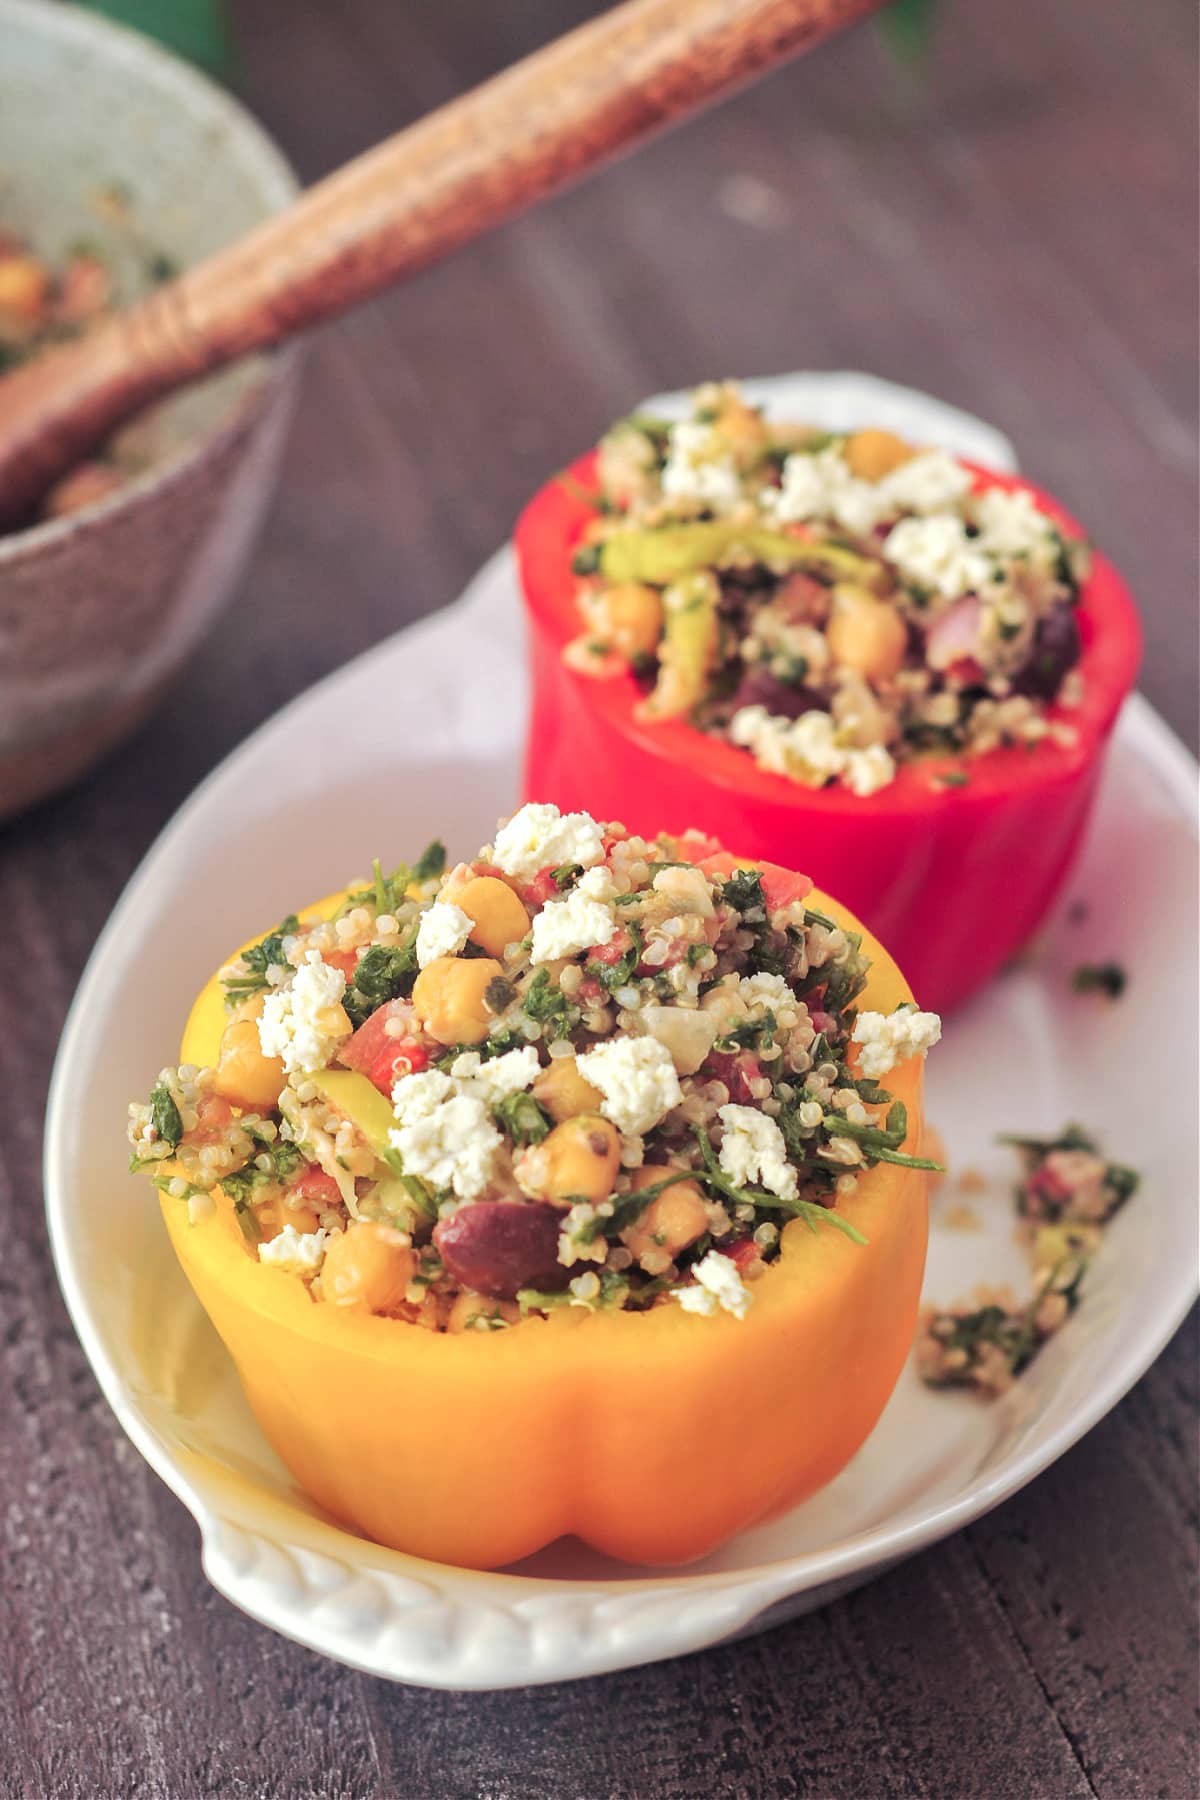 An orange and a red bell pepper with the tops cut off, filled with a chickpea tabbouleh salad. Peppers are sitting in a white oval dish on a dark wood table, with a grey bowl filled with more tabbouleh salad.